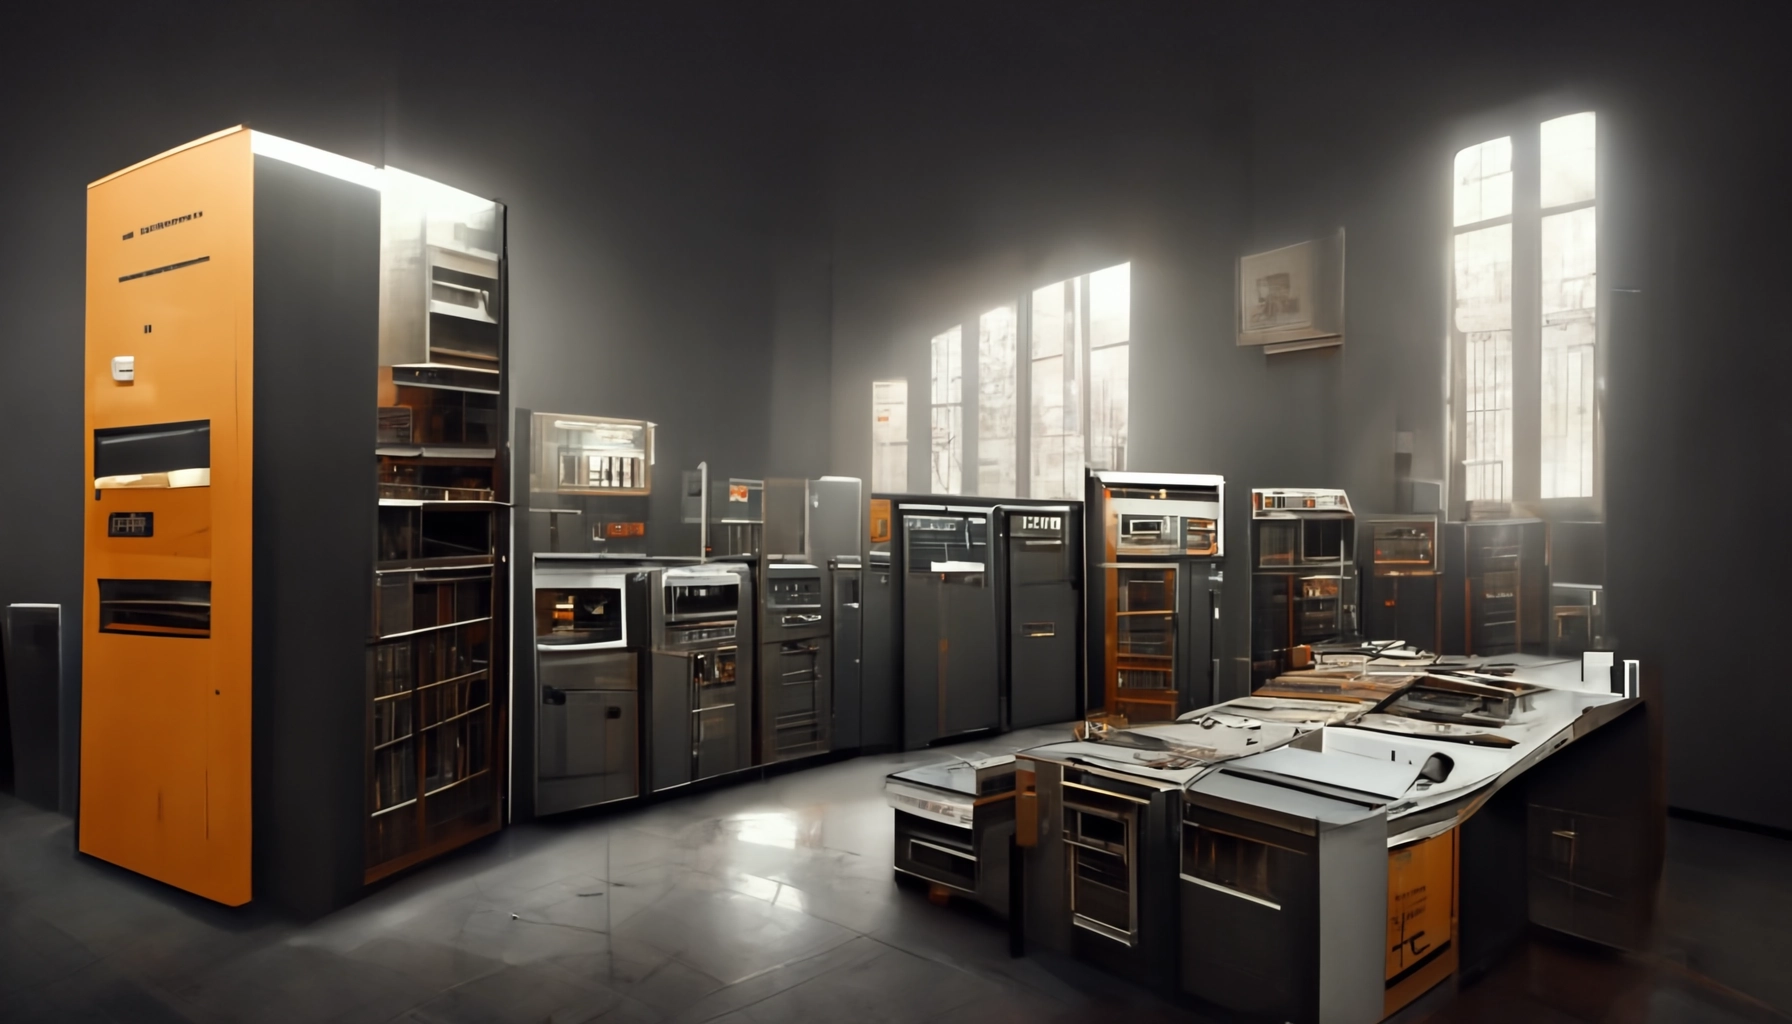 Digital Archives Servers as imagined by the Midjourney AI, showing servers of various sizes and designs on the right, a table with archival documents for preservation on the left and tall sunny windows in the background